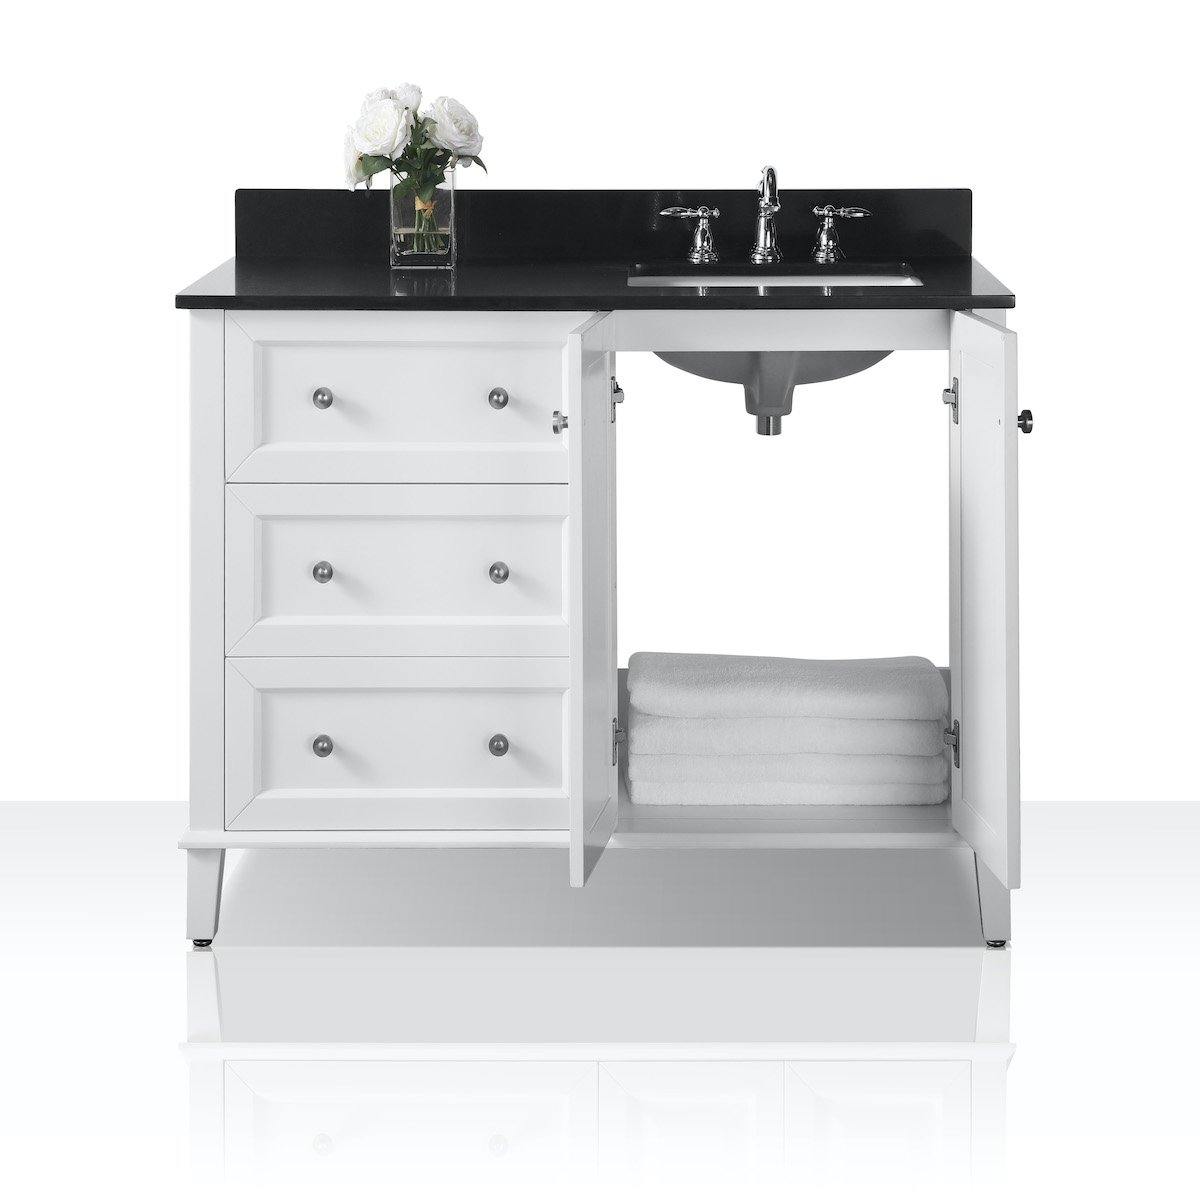 Ancerre Designs Hannah 48 Inch White Single Vanity with Right Basin and Nickel Hardware Open Cabinet